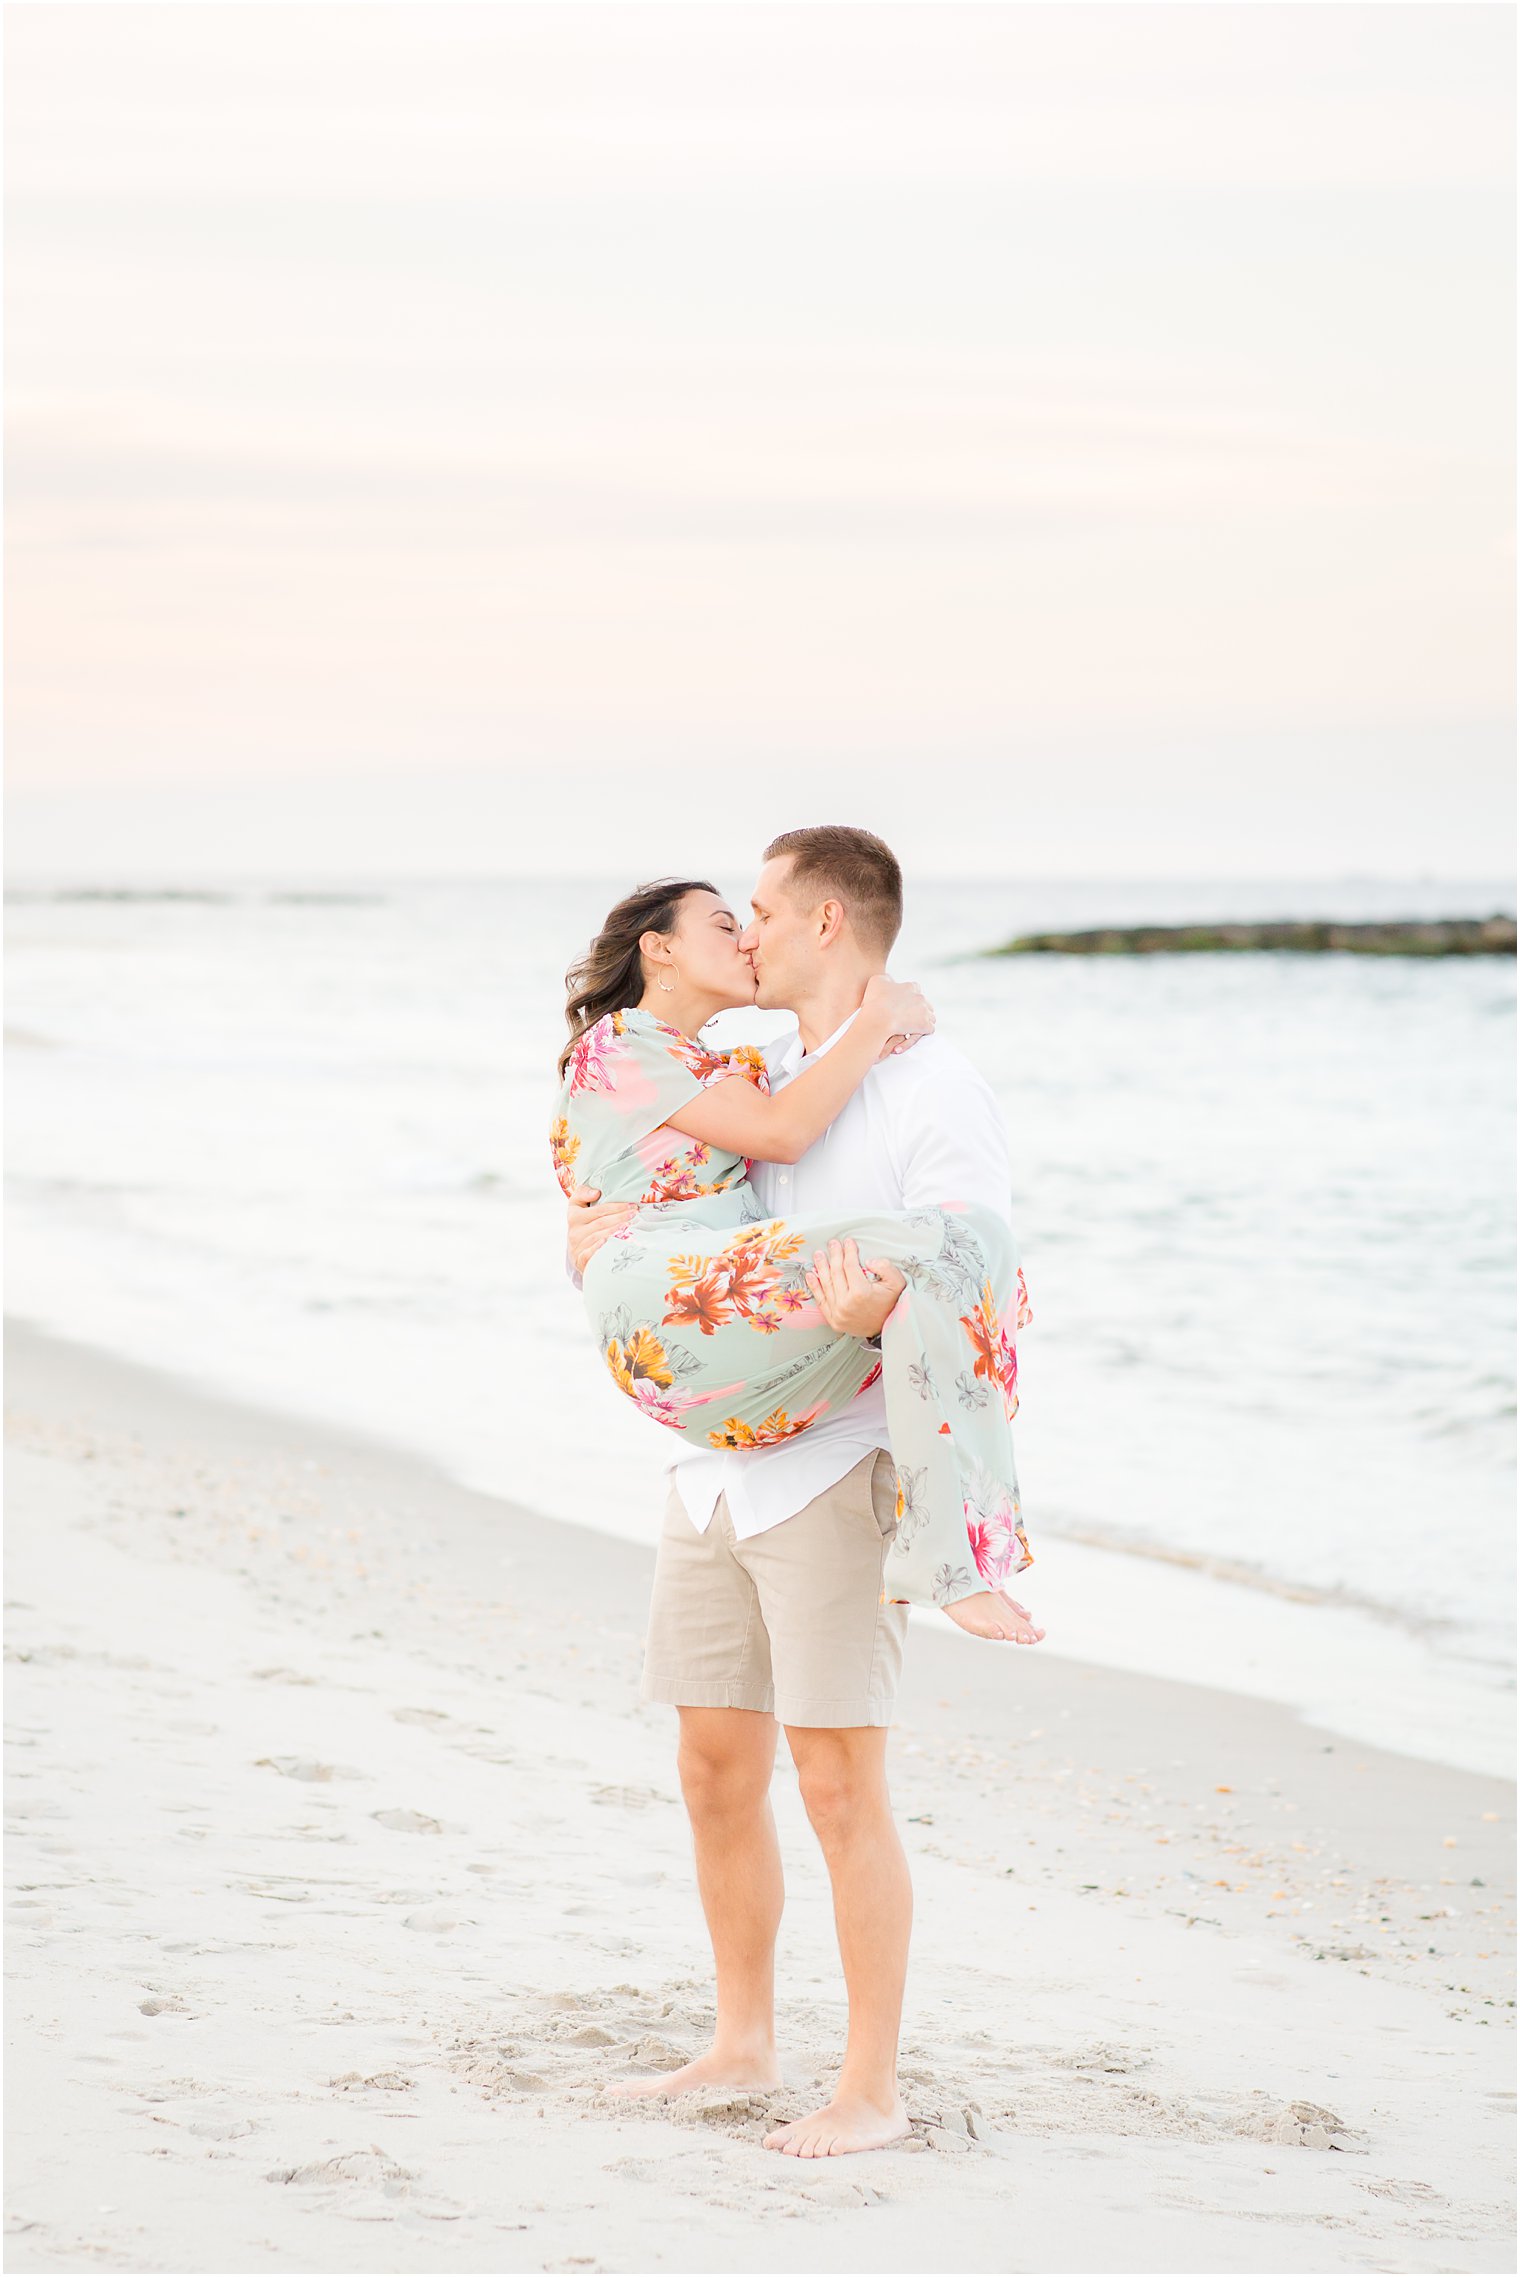 Groom lifting bride during beach engagement session 